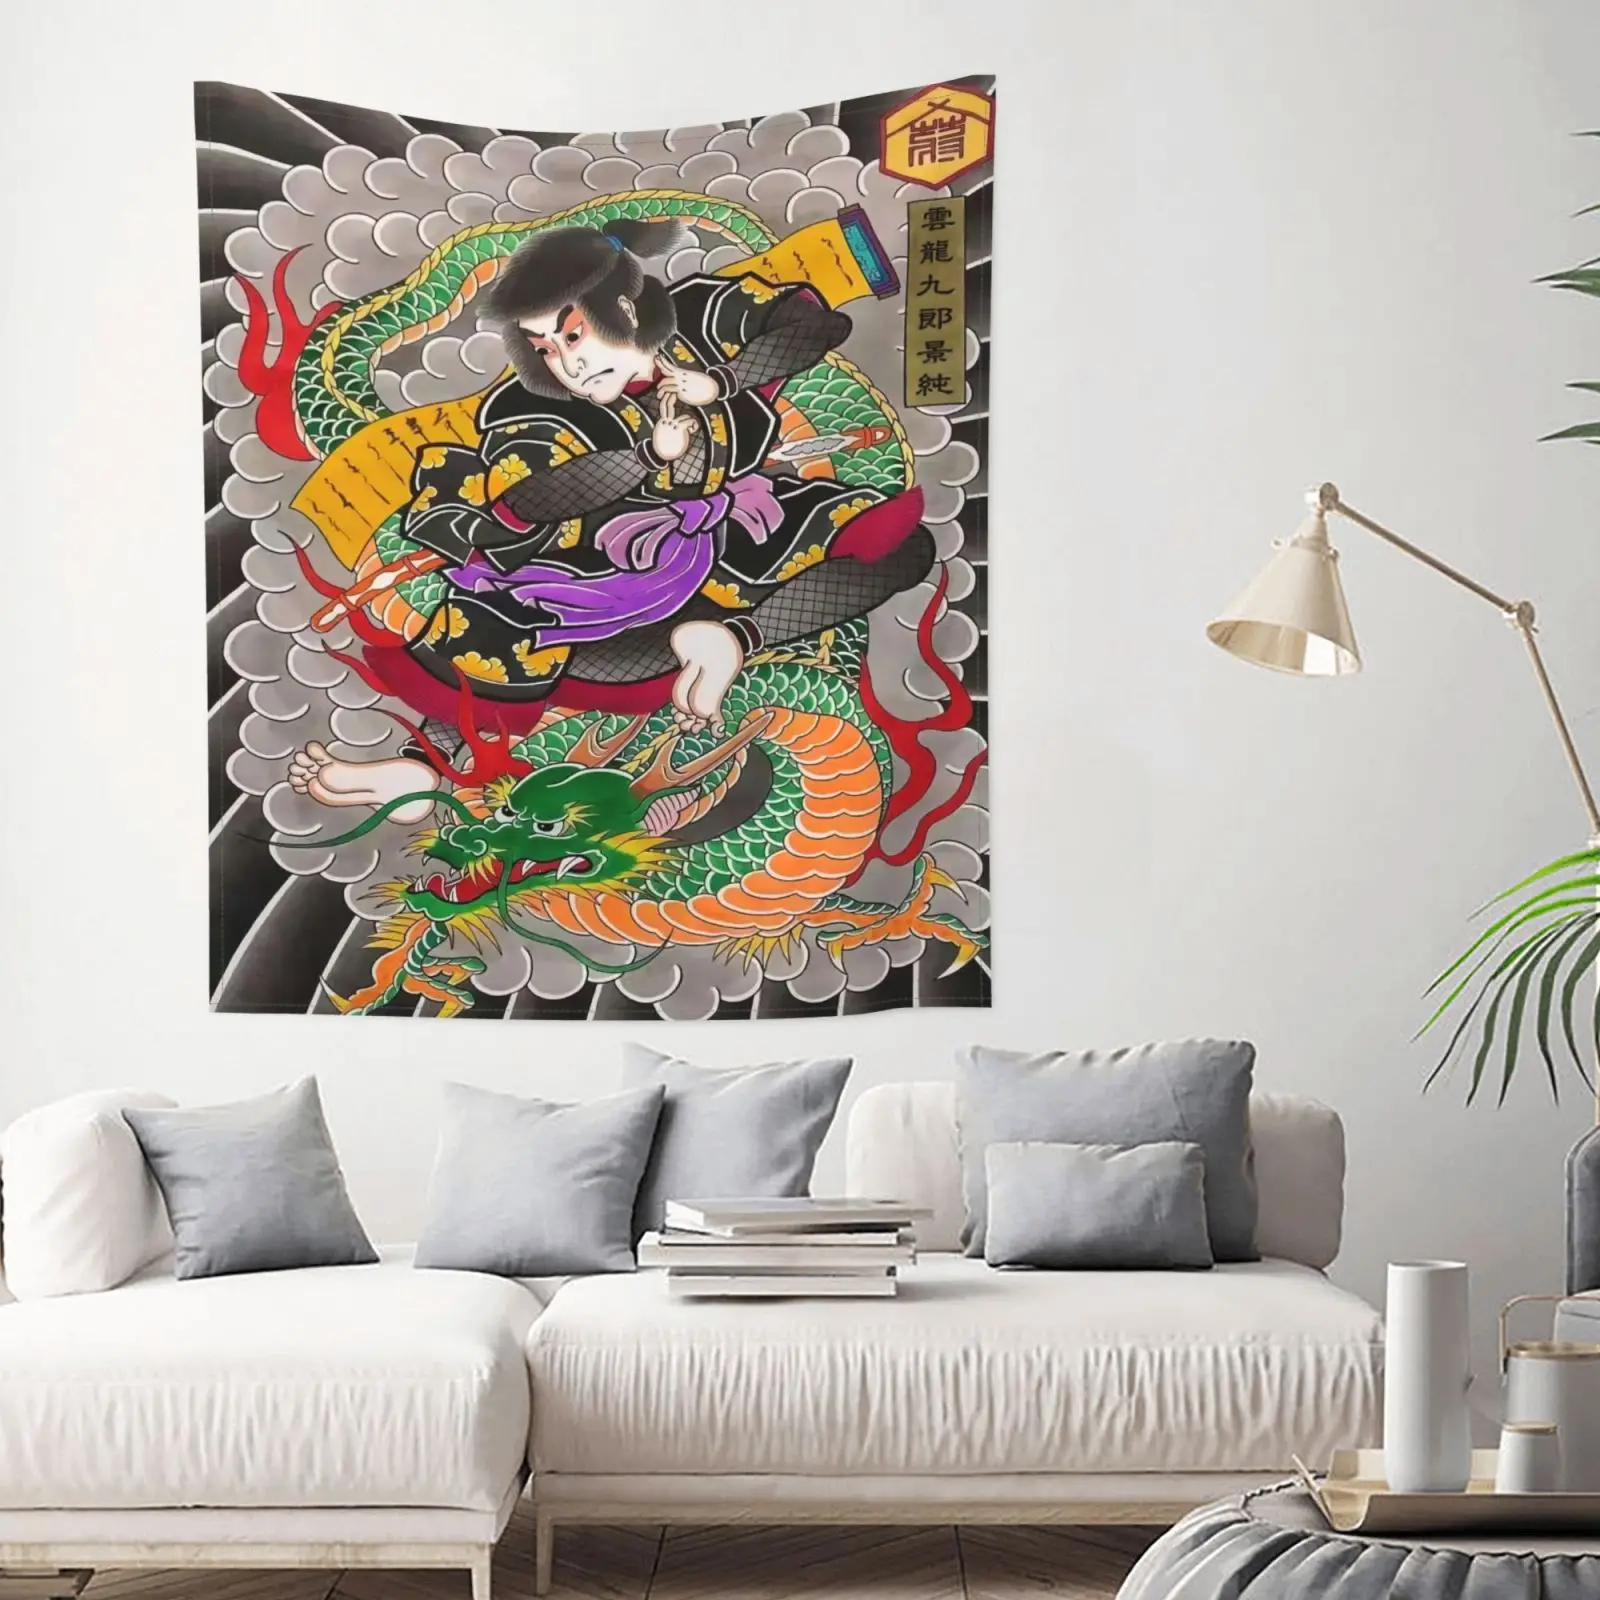 

Japanese Indie Anime Decoration Teen Room Decor Tapestry Wall Hanging Esotericism Kawaii Room Macrame Posters Witch Decor